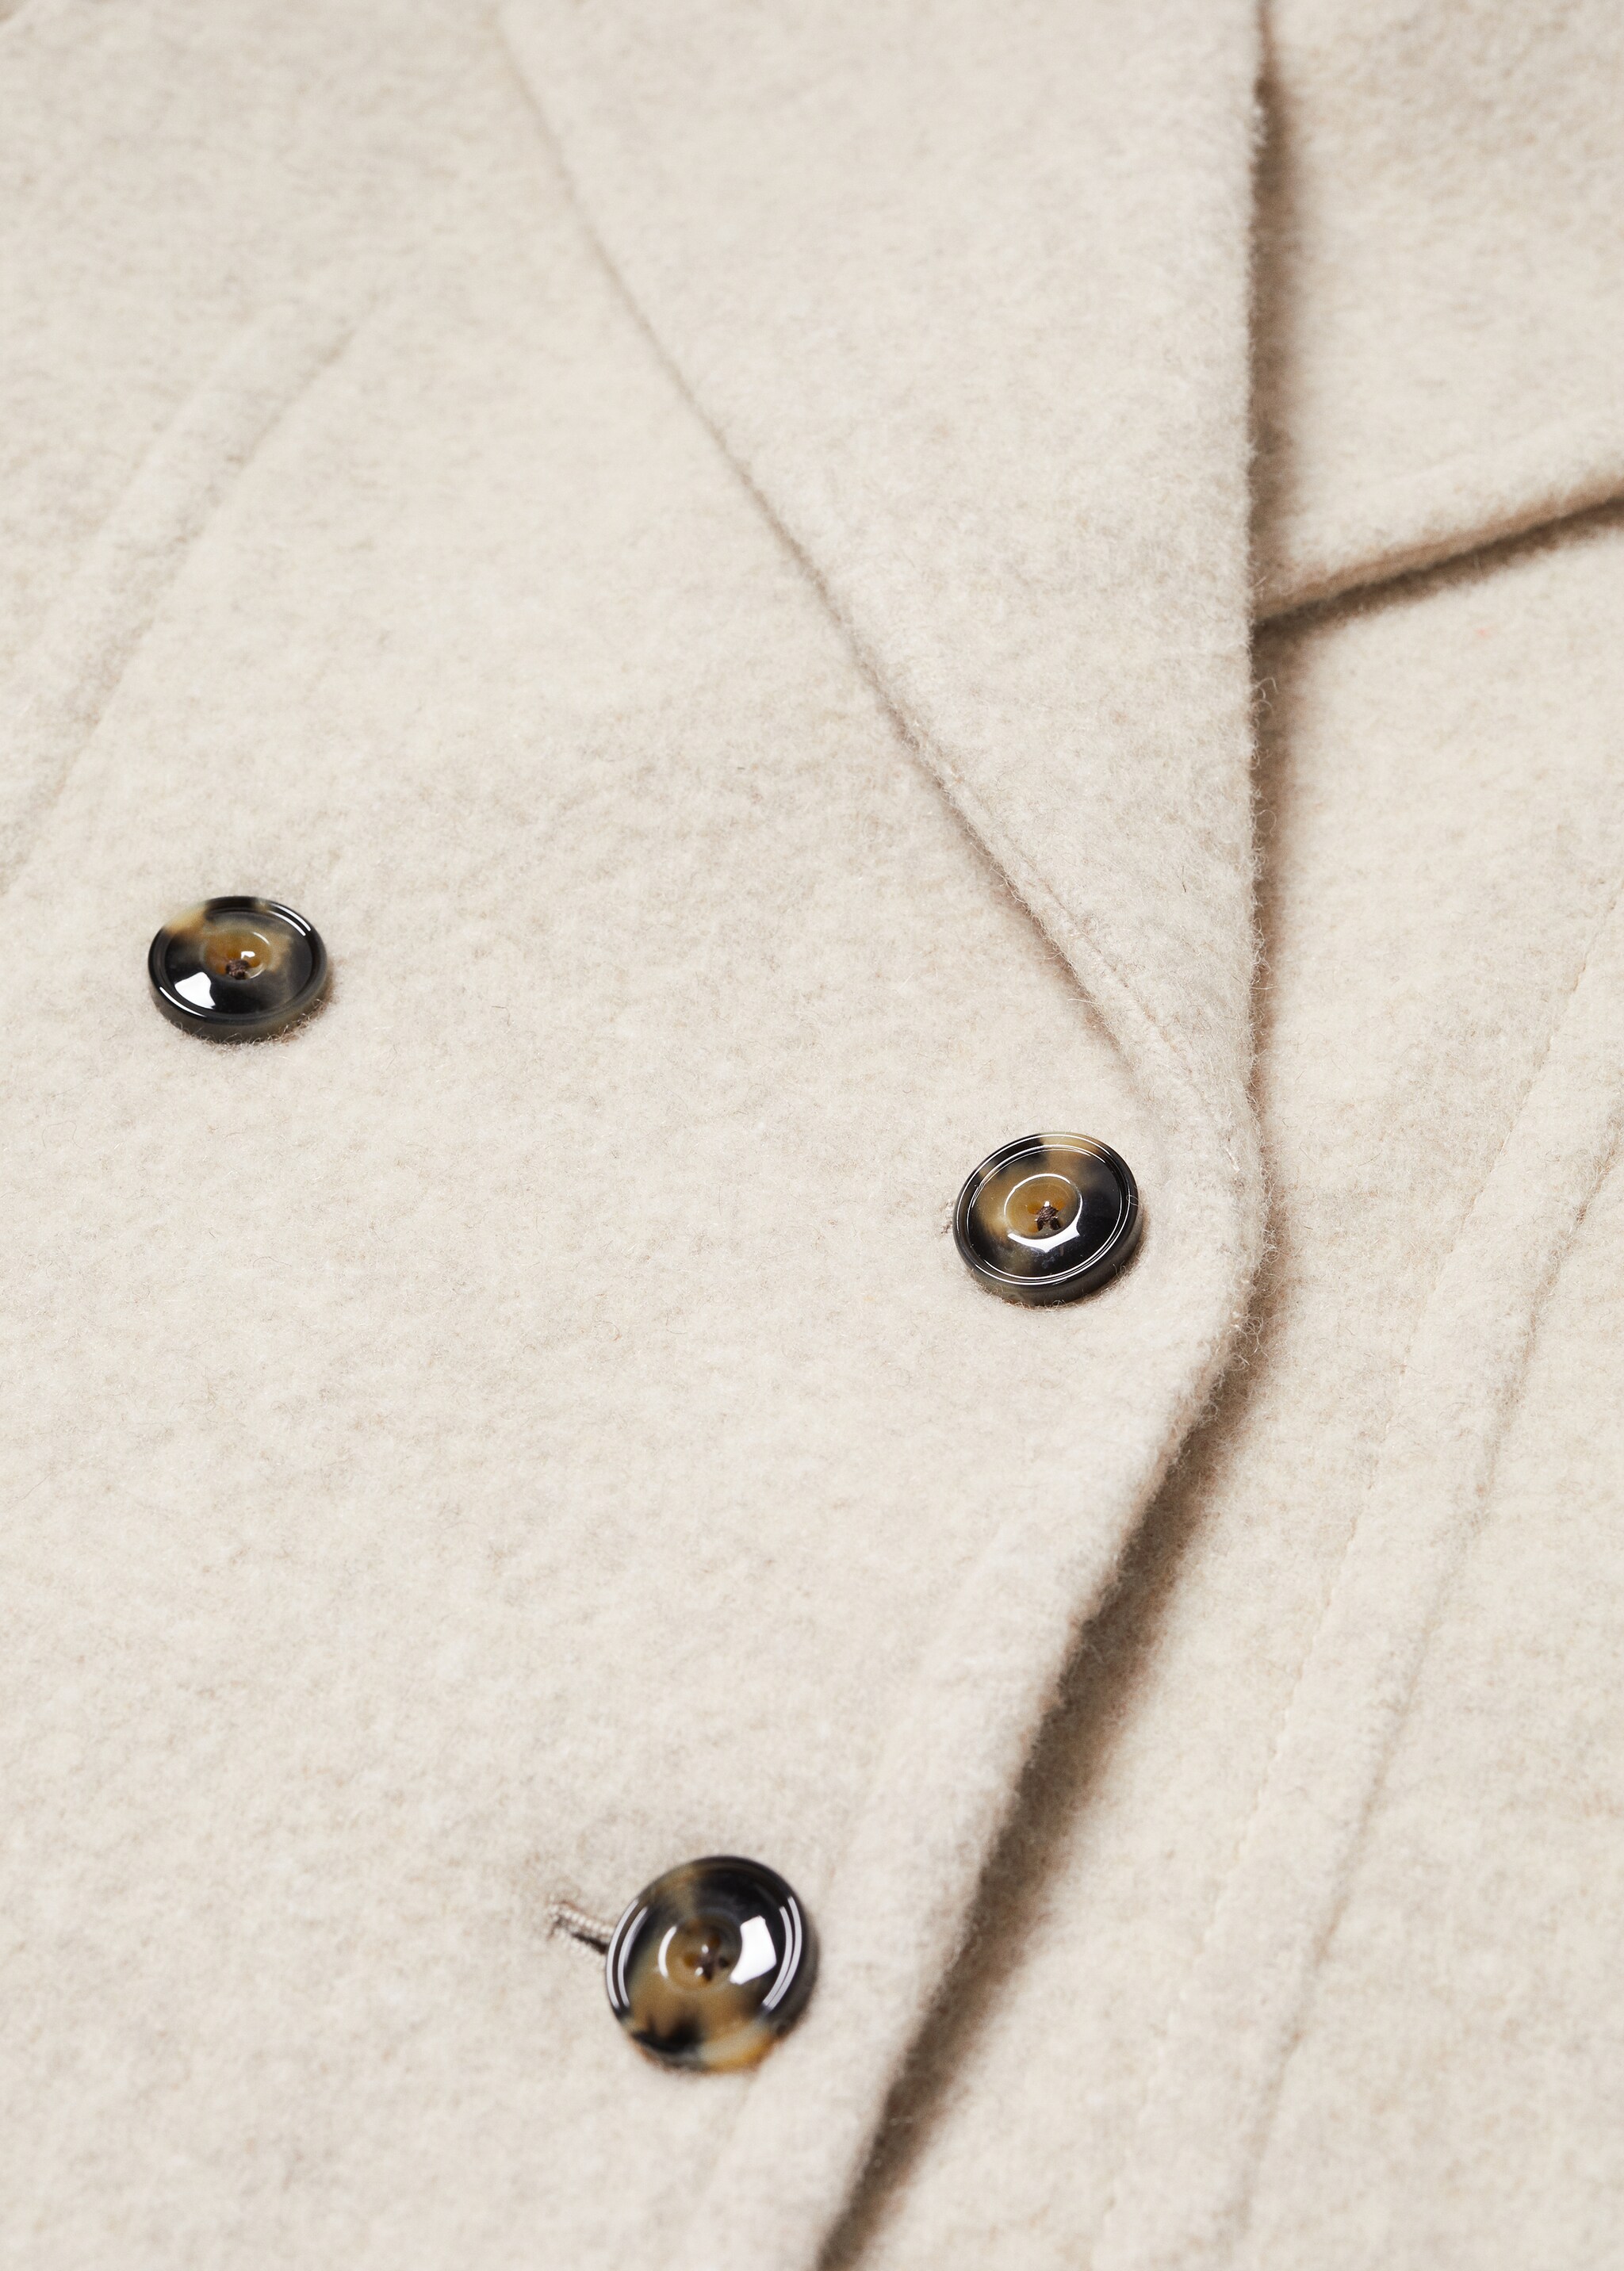 Double-breasted wool coat - Details of the article 8